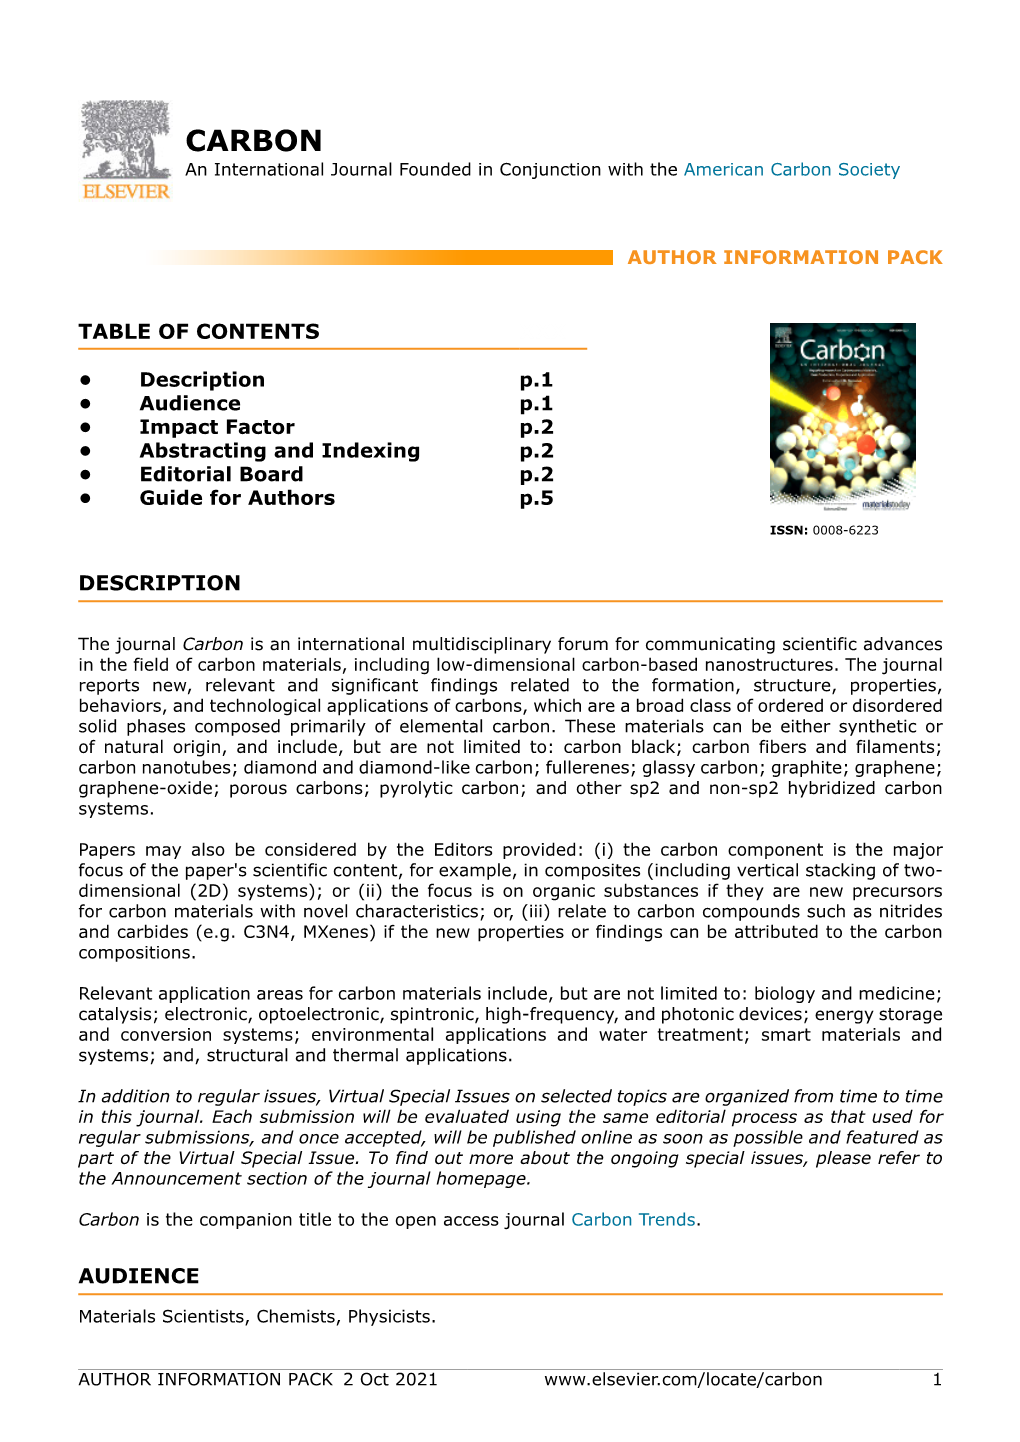 CARBON an International Journal Founded in Conjunction with the American Carbon Society